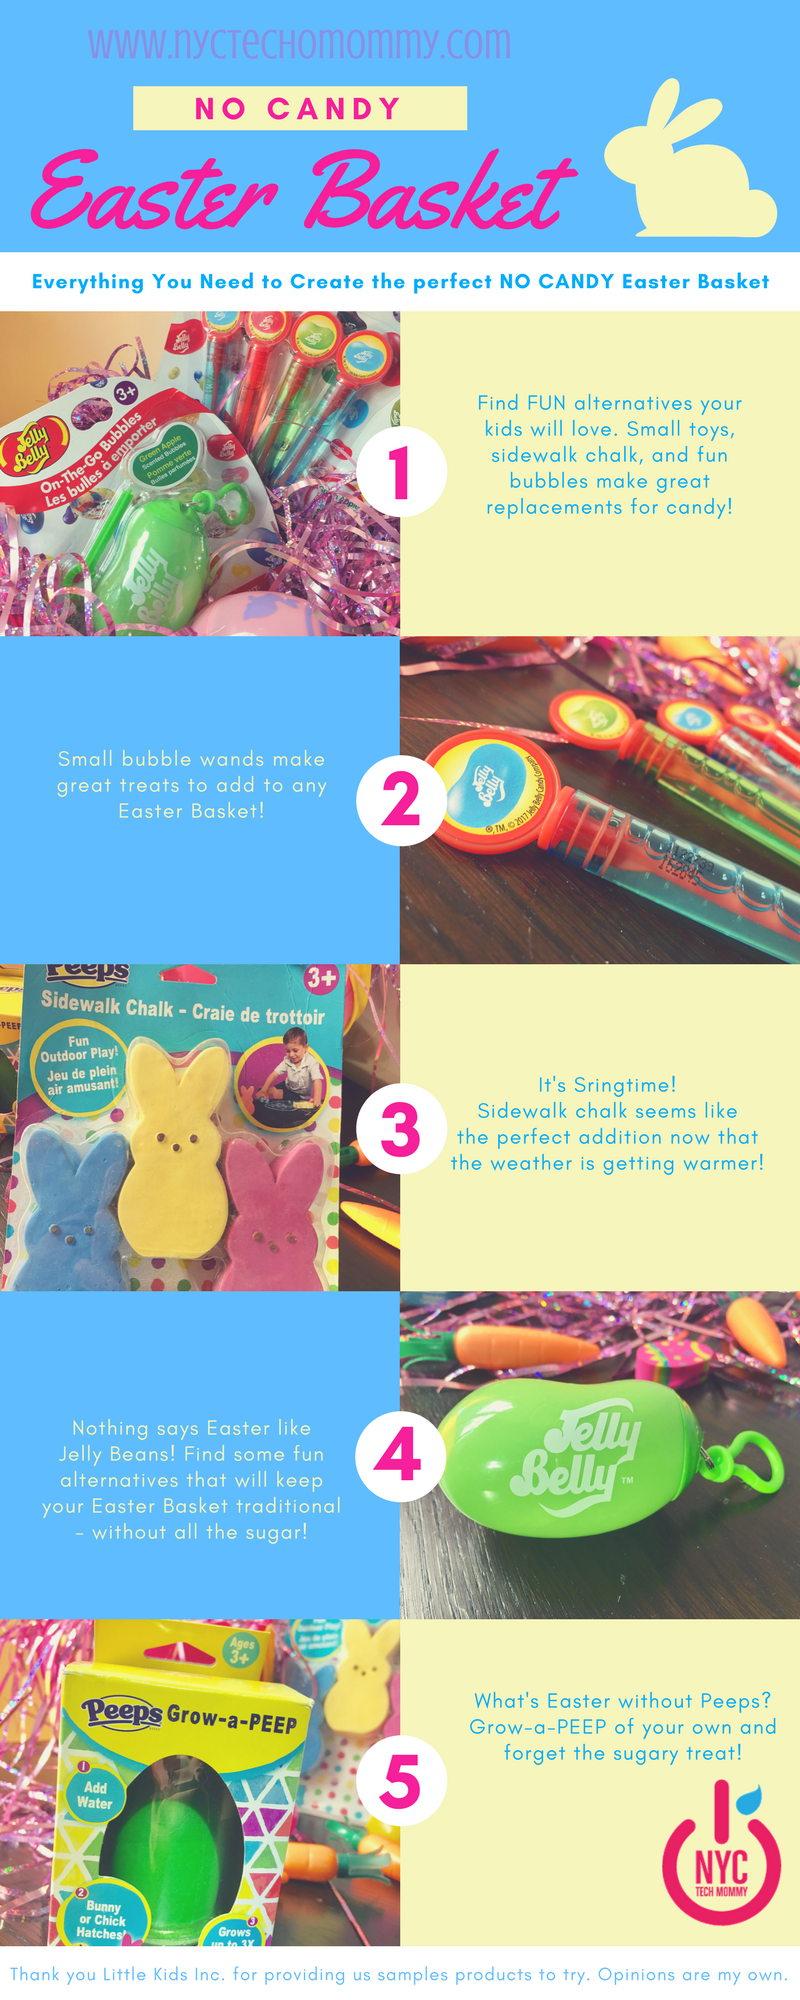 Looking for ideas that don't involve candy? Here's everything you need to fill a perfectly fun NO CANDY Easter Basket kids will love and enjoy all Spring! Loads of non-candy treat ideas #EasterBasket